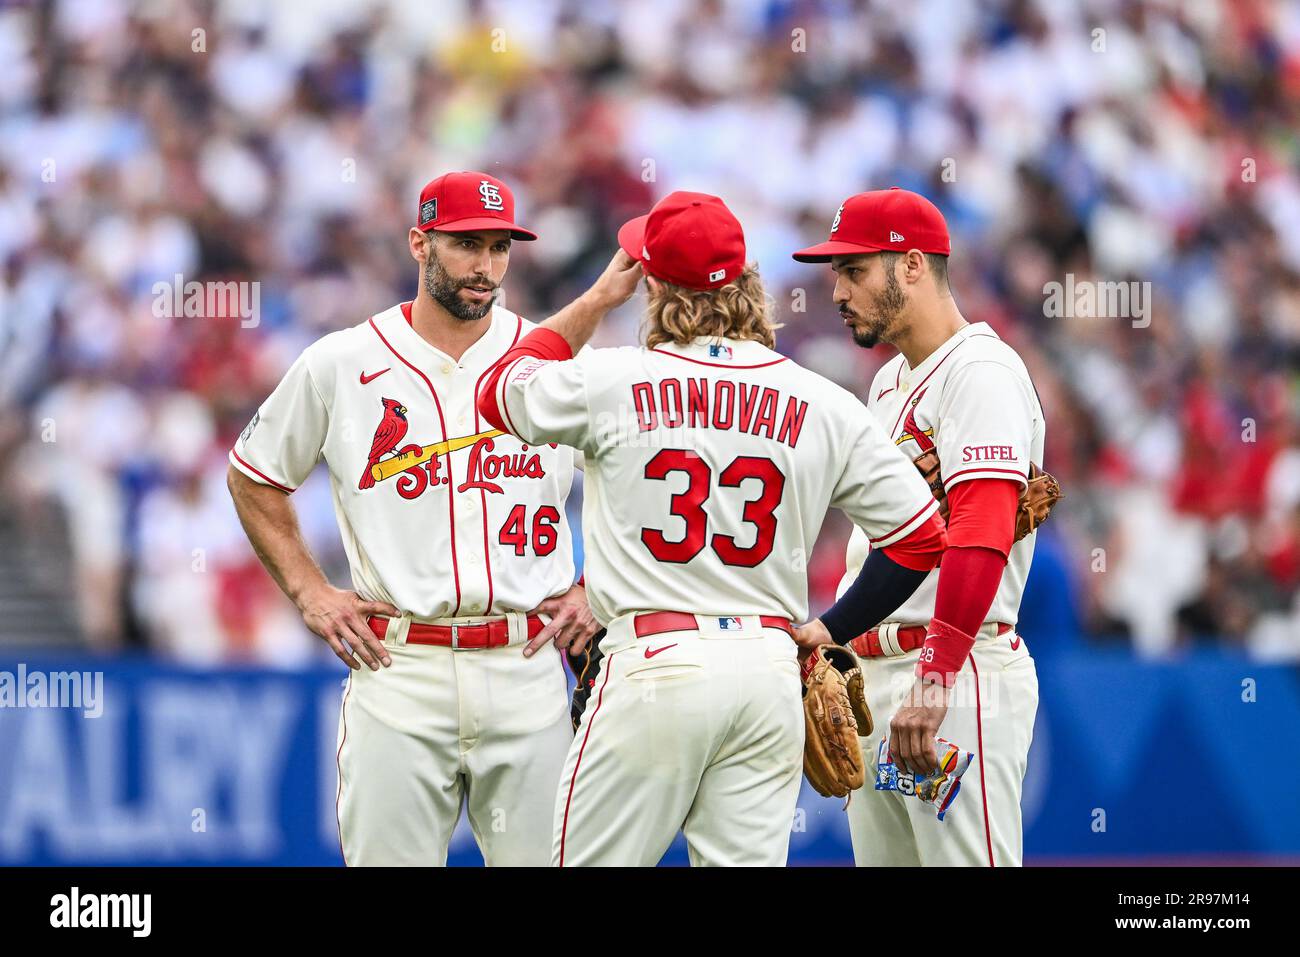 Brendan Donovan #33, Nolan Arenado #28 and Paul Goldschmidt #46 of the St. Louis Cardinals chat during the 2023 MLB London Series match St. Louis Cardinals vs Chicago Cubs at London Stadium, London, United Kingdom, 24th June 2023  (Photo by Craig Thomas/News Images) Stock Photo